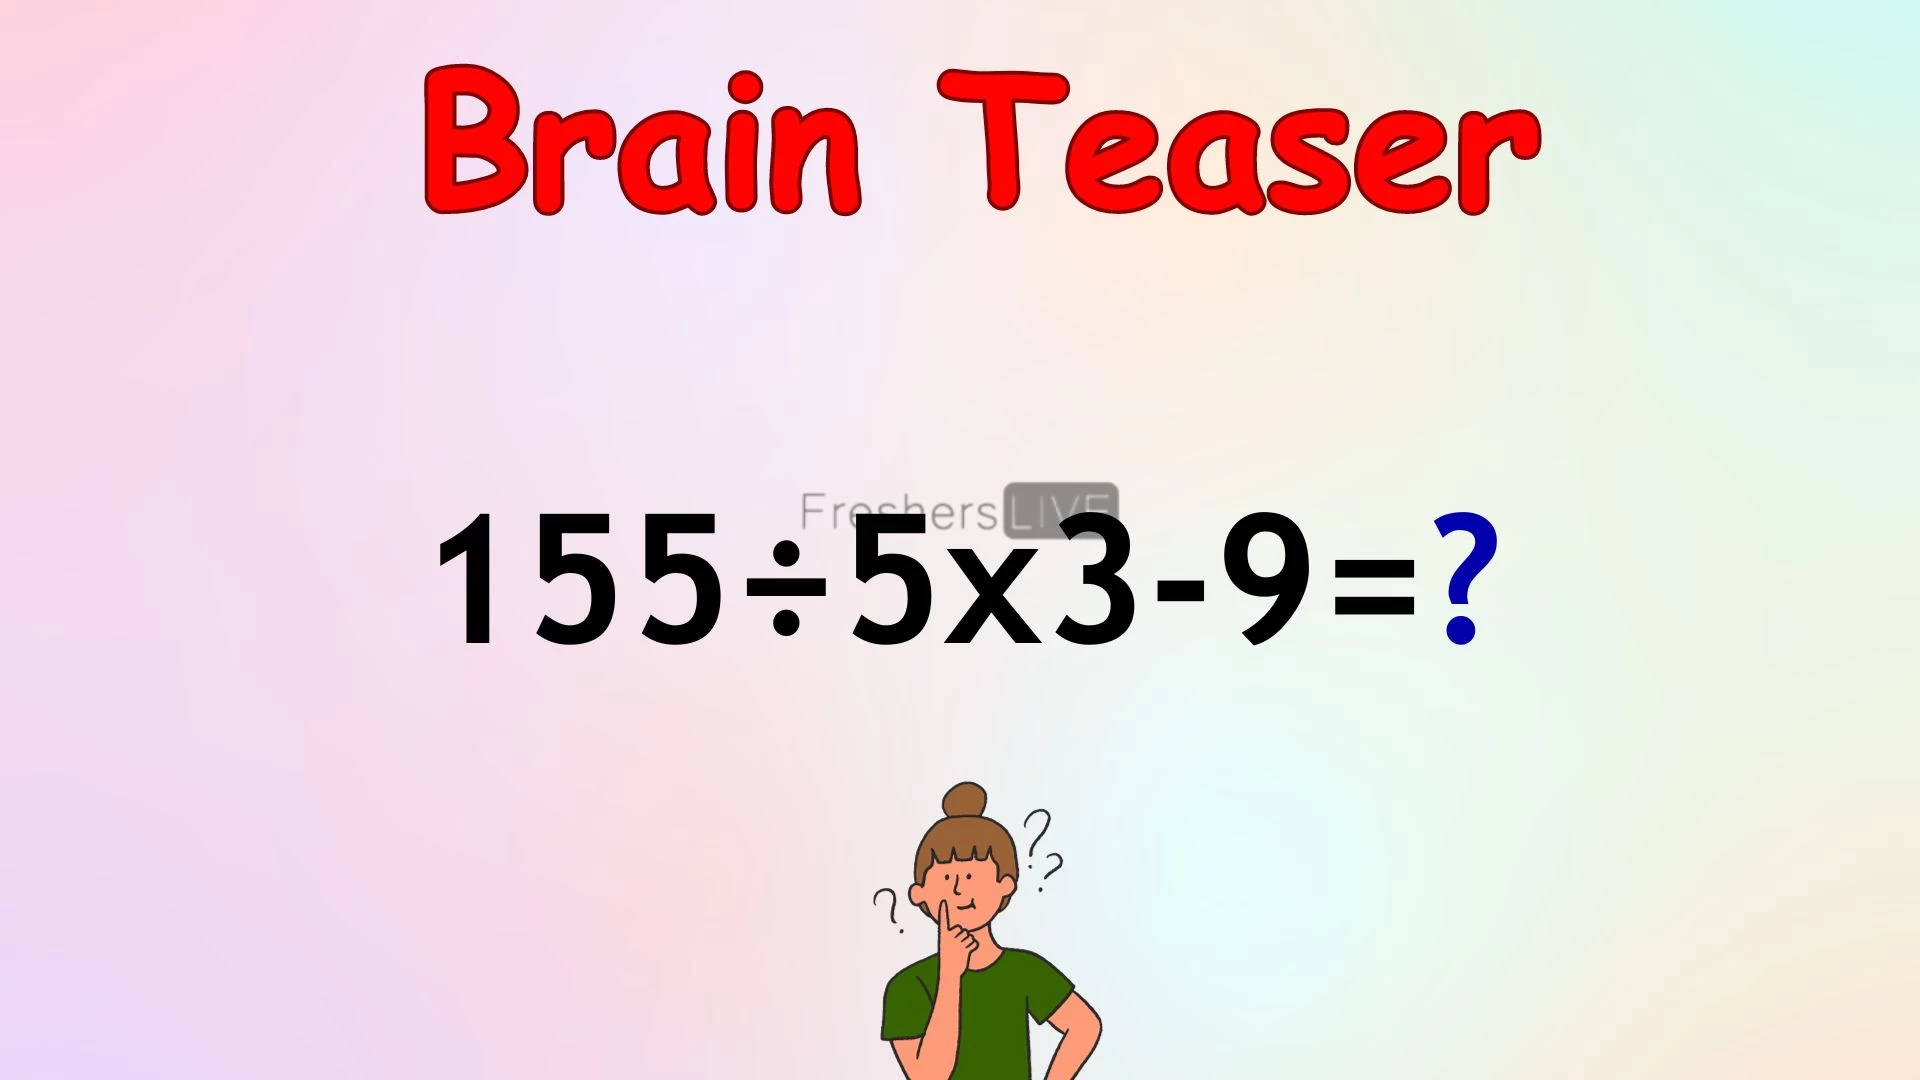 Can You Solve This Challenging Math Problem? Evaluate 155÷5x3-9